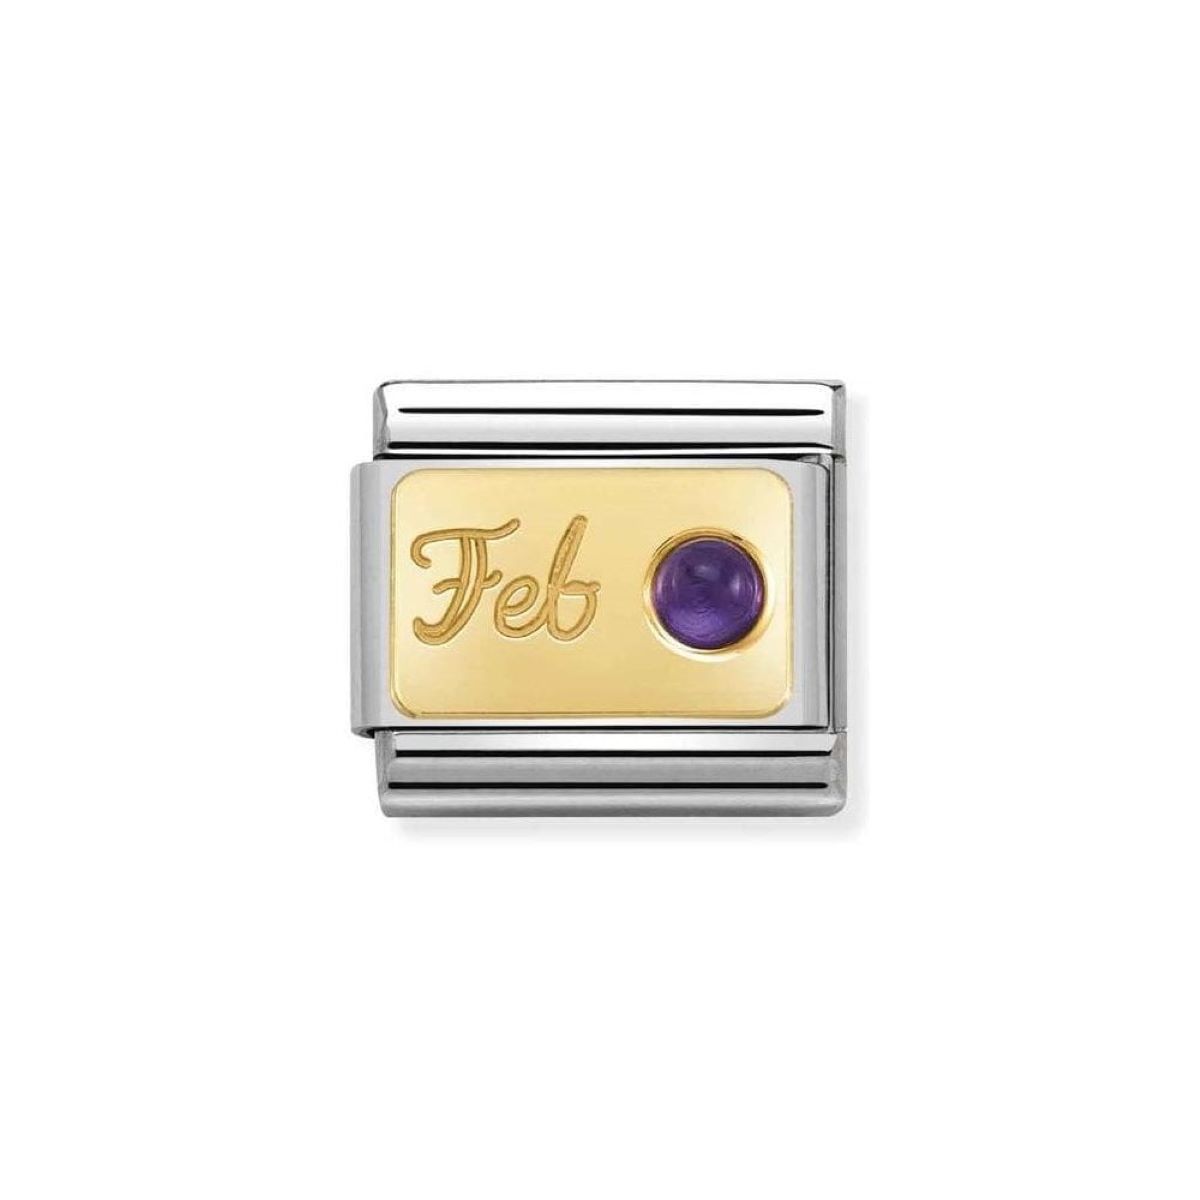 Nomination February Charm 18k Gold with Amethyst